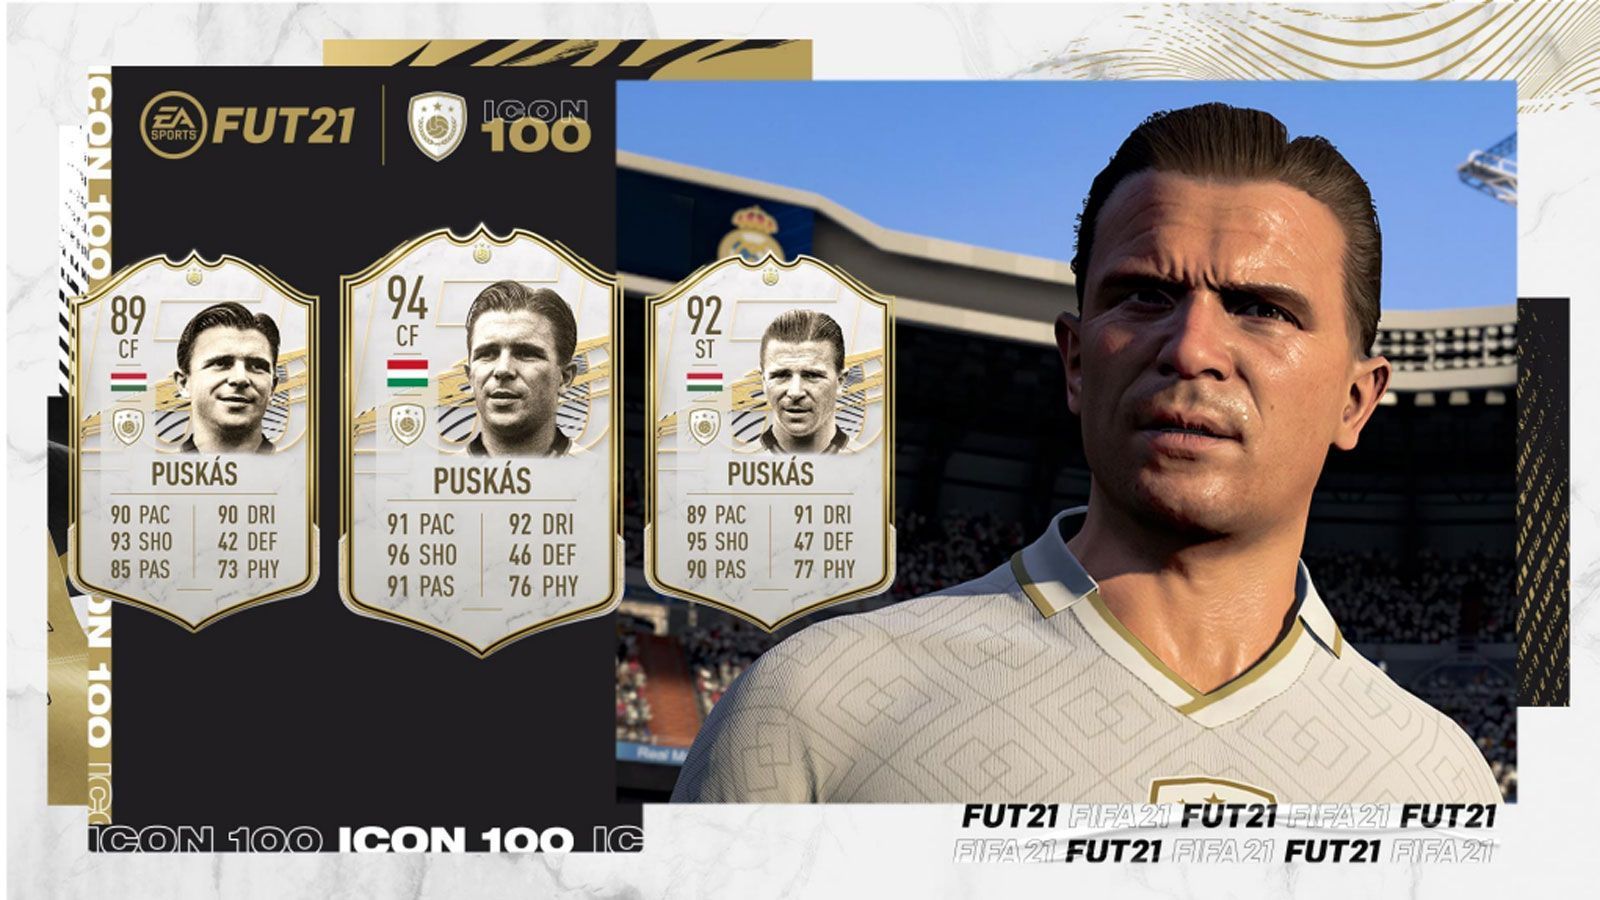 
                <strong>Ferenc Puskas</strong><br>
                Position: SturmBasis-Icon-Rating: 89Mid-Icon-Rating: 92Prime-Icon-Rating: 94
              